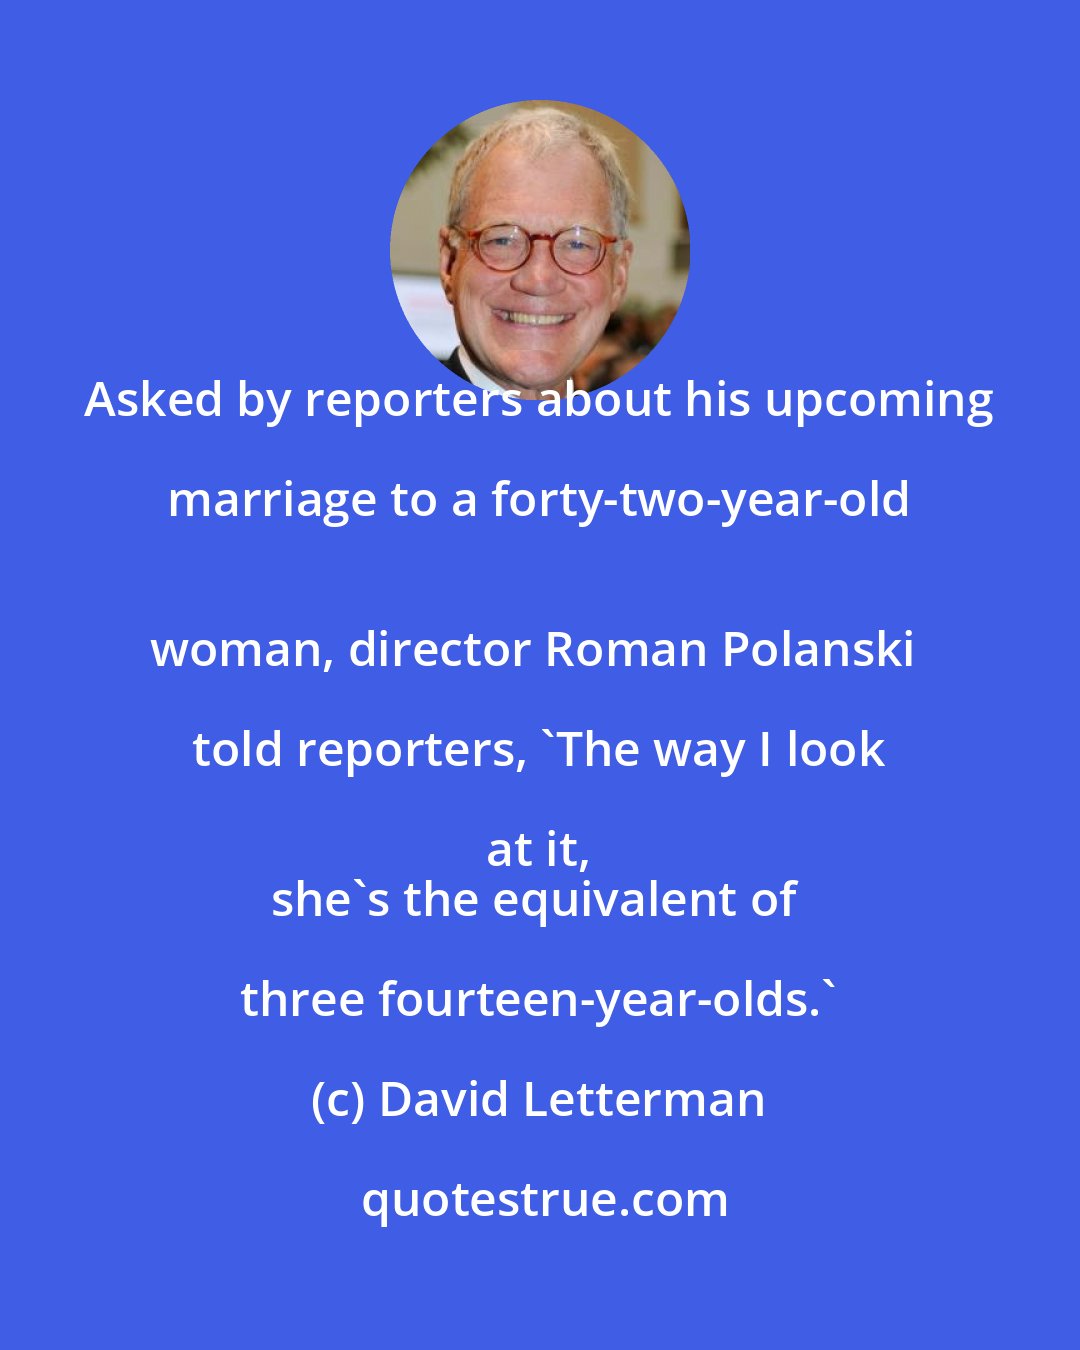 David Letterman: Asked by reporters about his upcoming marriage to a forty-two-year-old 
woman, director Roman Polanski told reporters, `The way I look at it, 
she's the equivalent of three fourteen-year-olds.'